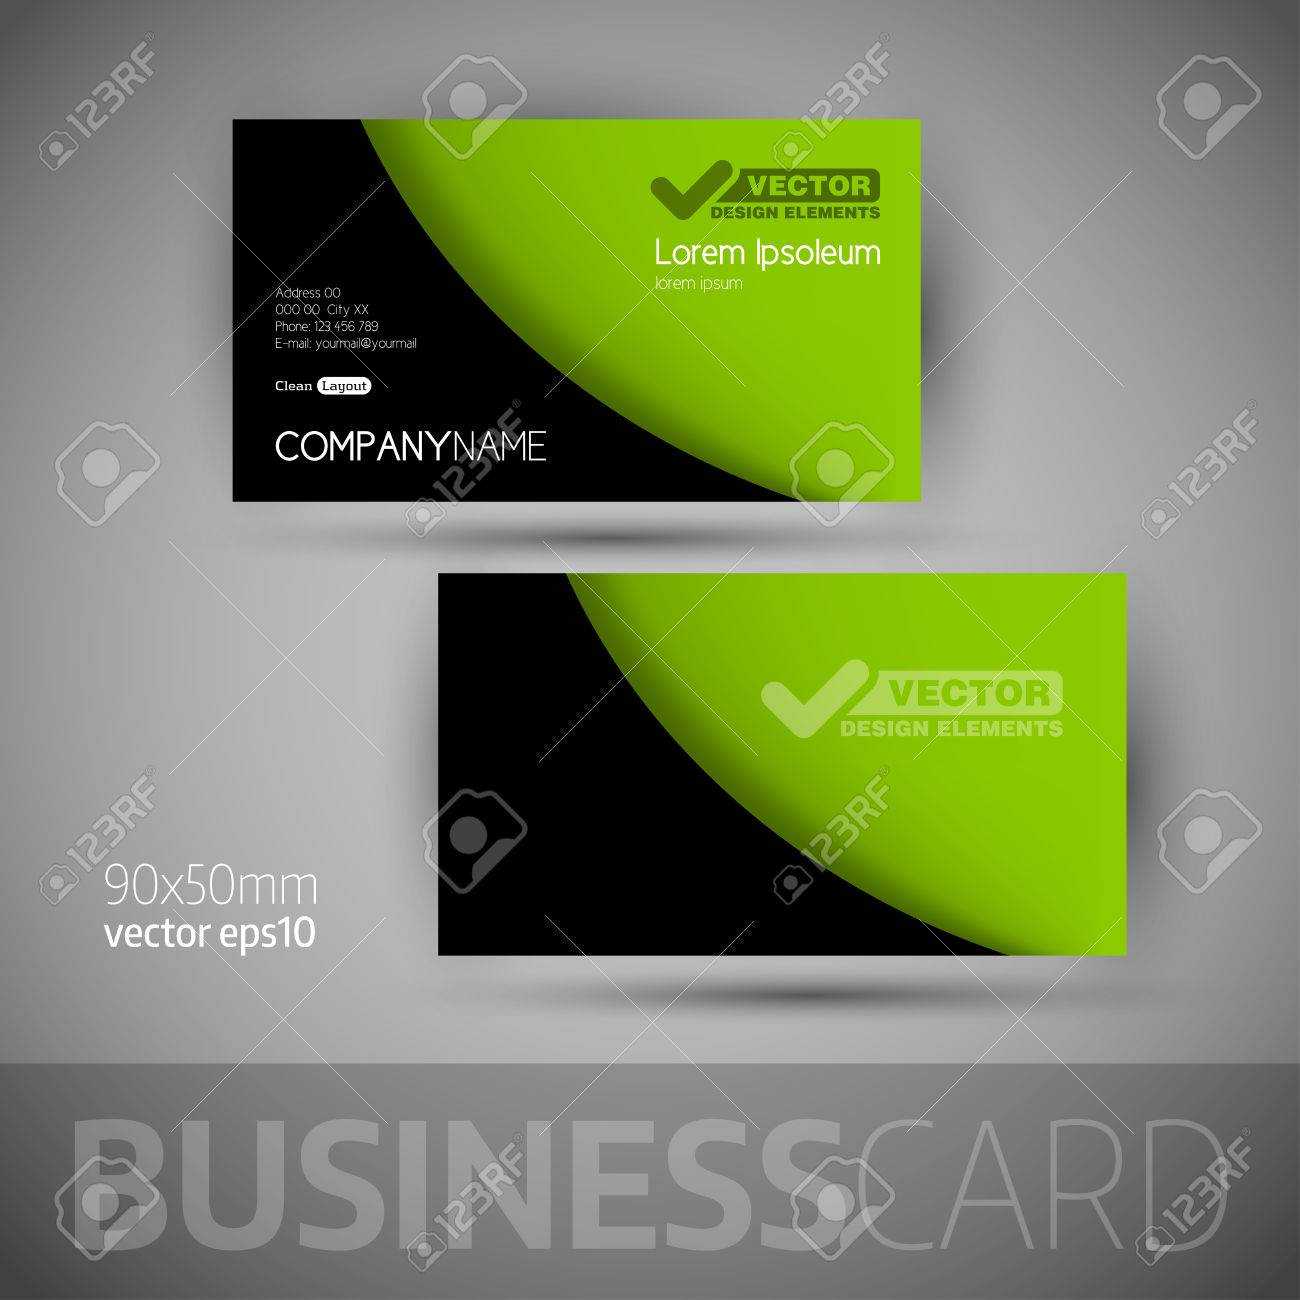 Business Card Template With Sample Texts. Elegant Vector Design.. For Calling Card Free Template